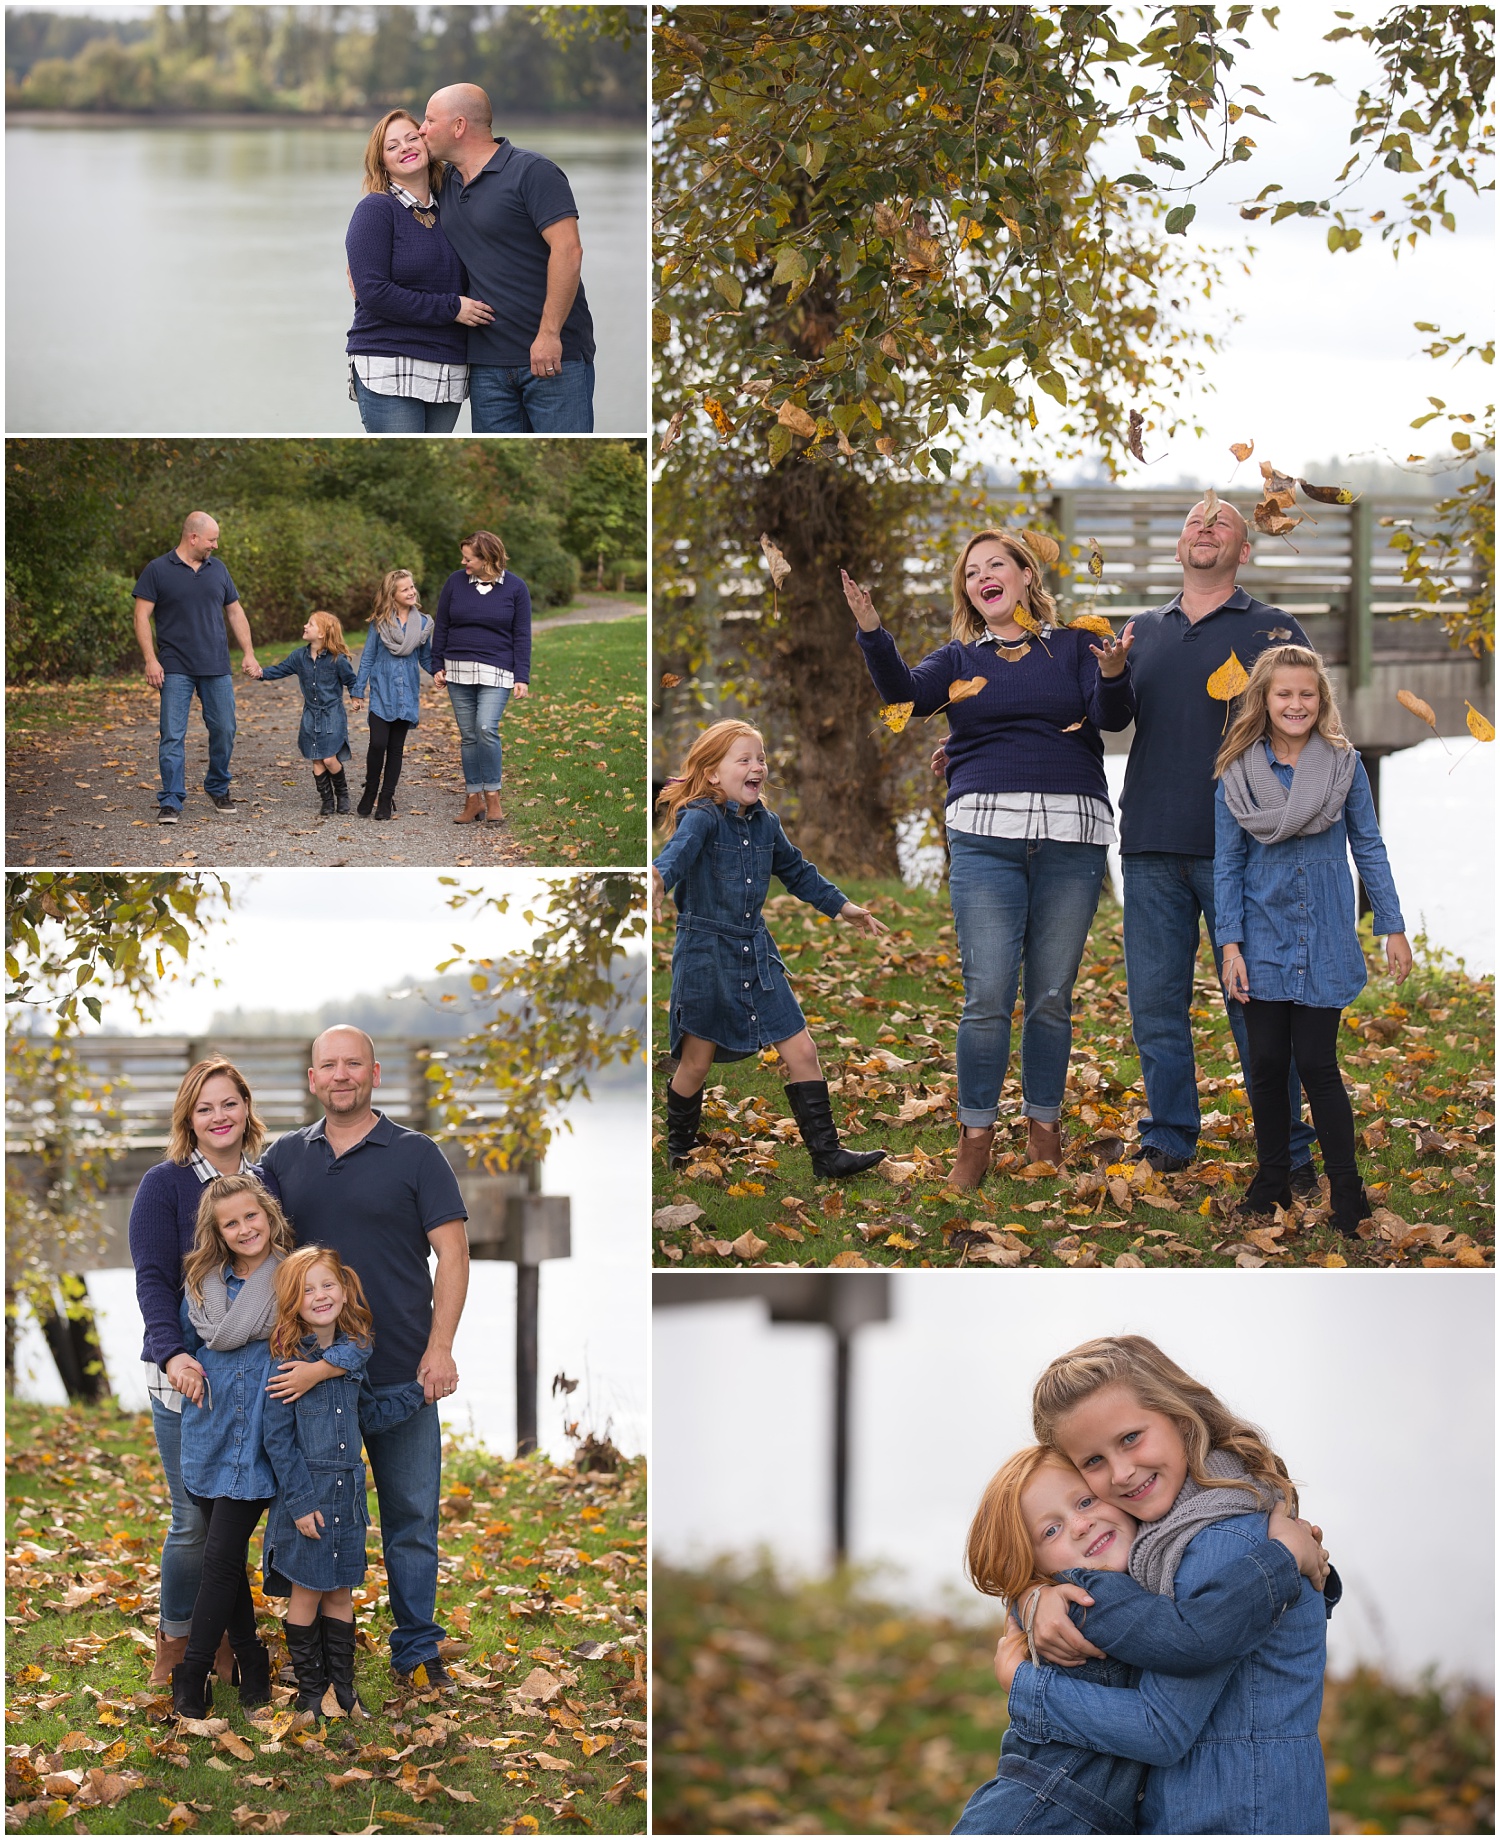 Amazing Day Photography - Fall Mini Sessions - Fall Family Photos - Langley Family Photographer (4).jpg